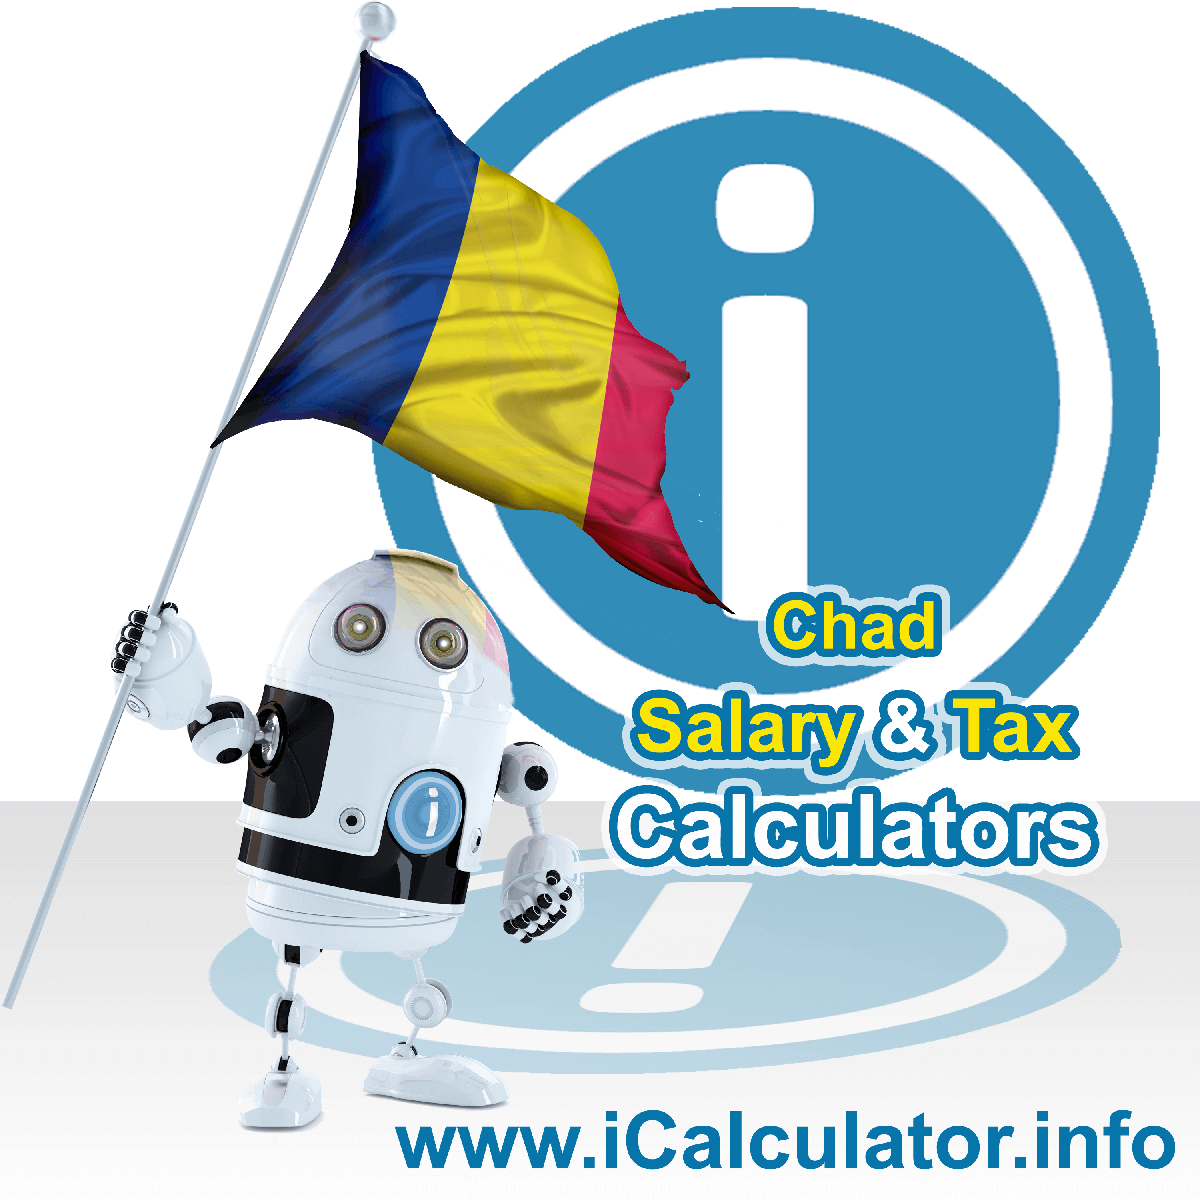 Chad Salary Calculator. This image shows the Chadese flag and information relating to the tax formula for the Chad Tax Calculator